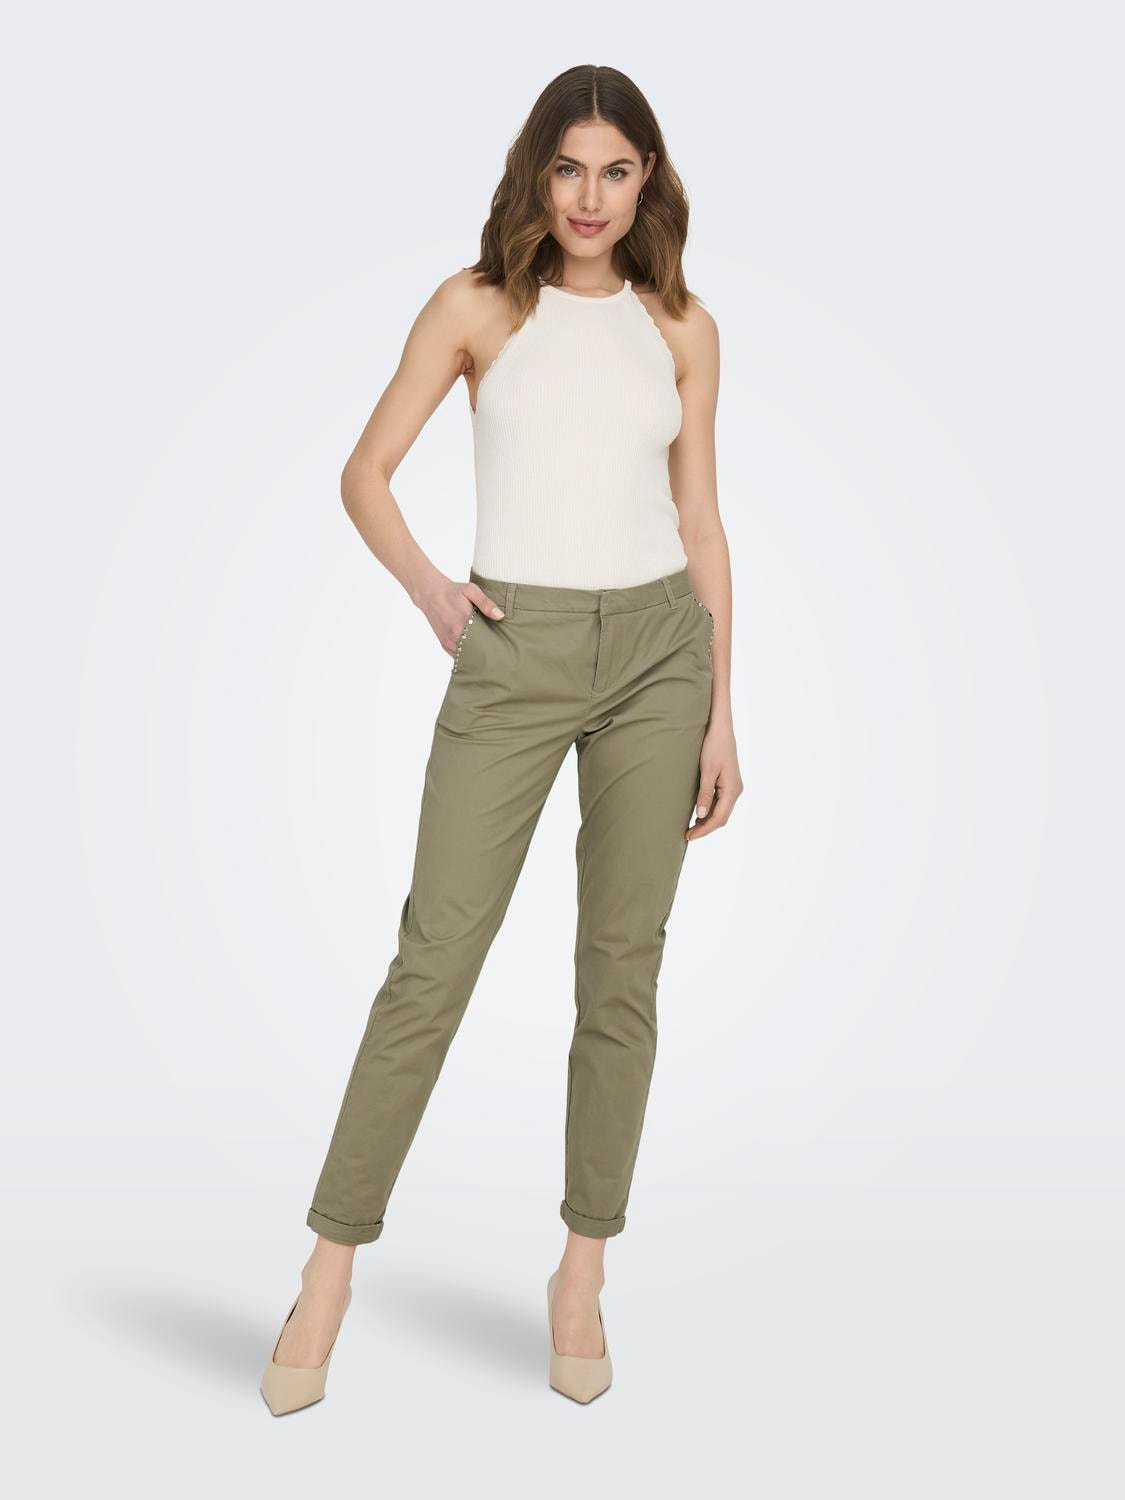 ONLY Solid colored Chinos -Mermaid - 15278920